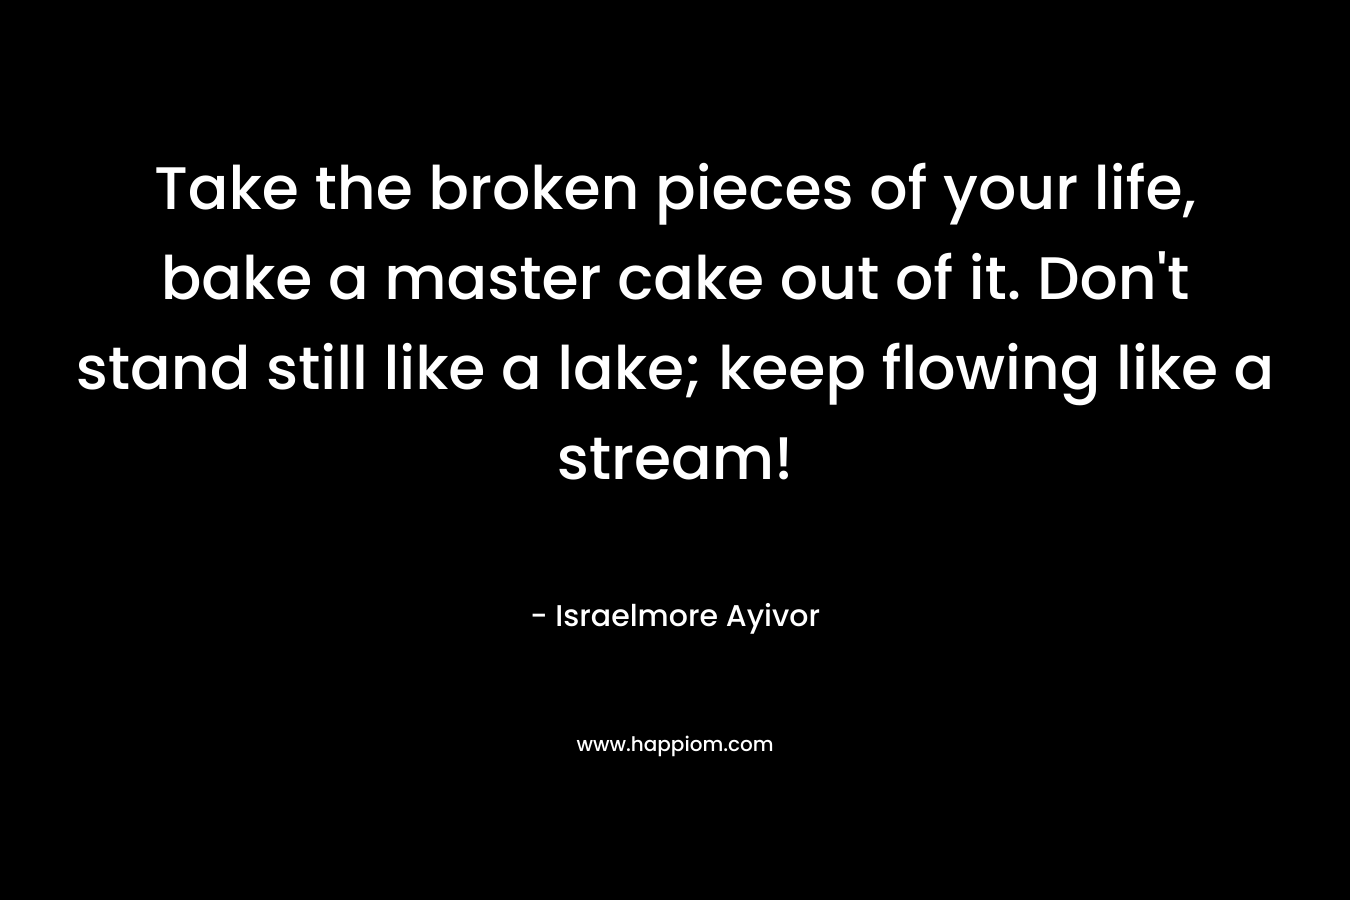 Take the broken pieces of your life, bake a master cake out of it. Don't stand still like a lake; keep flowing like a stream!